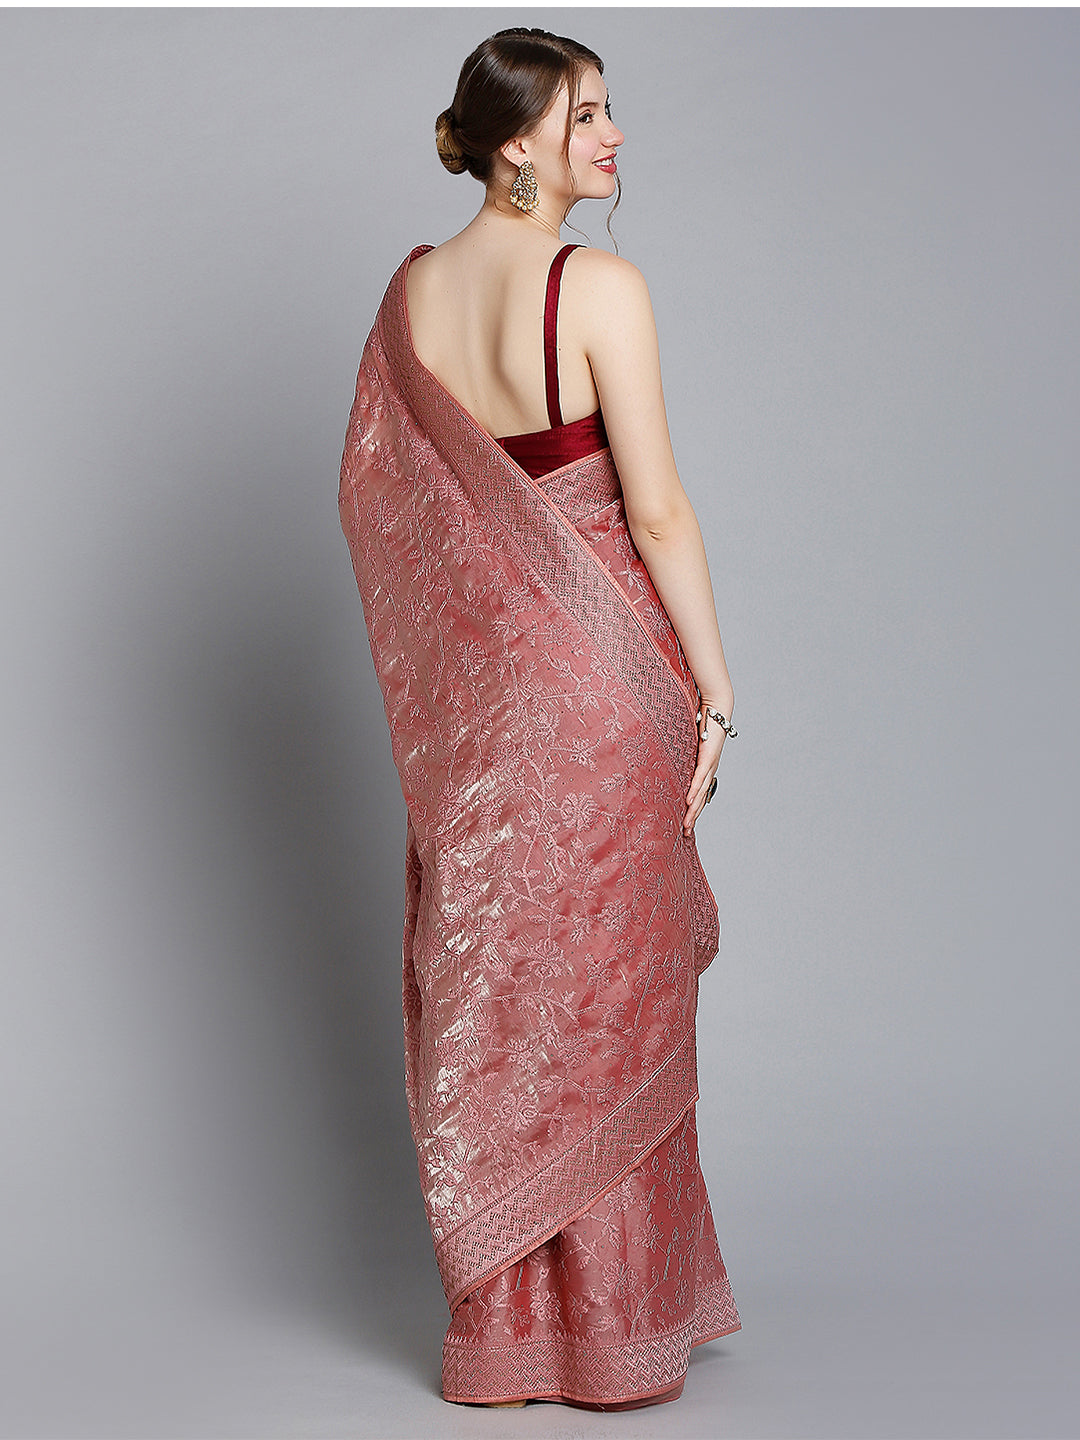 Rose Pink Soft Tissue Saree With Floral Embroidery